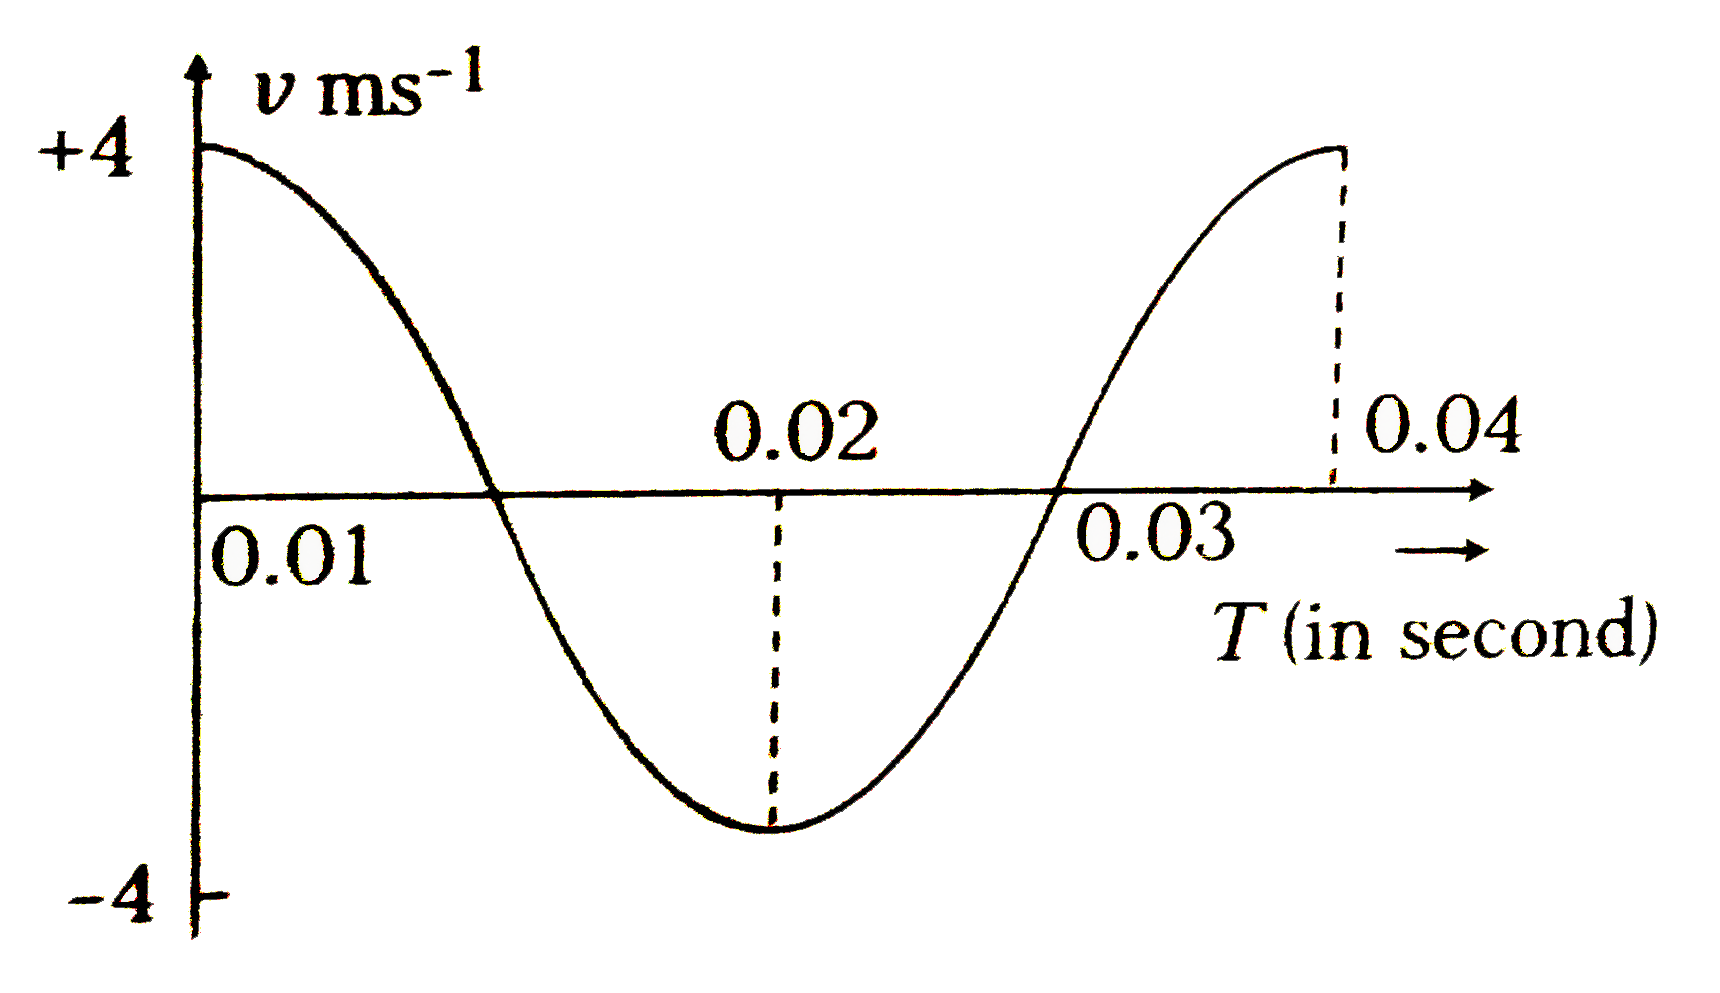 The velocity-time diagram of a harmonic oscillator is shown in adjoinning figure. The frequency of oscillation is